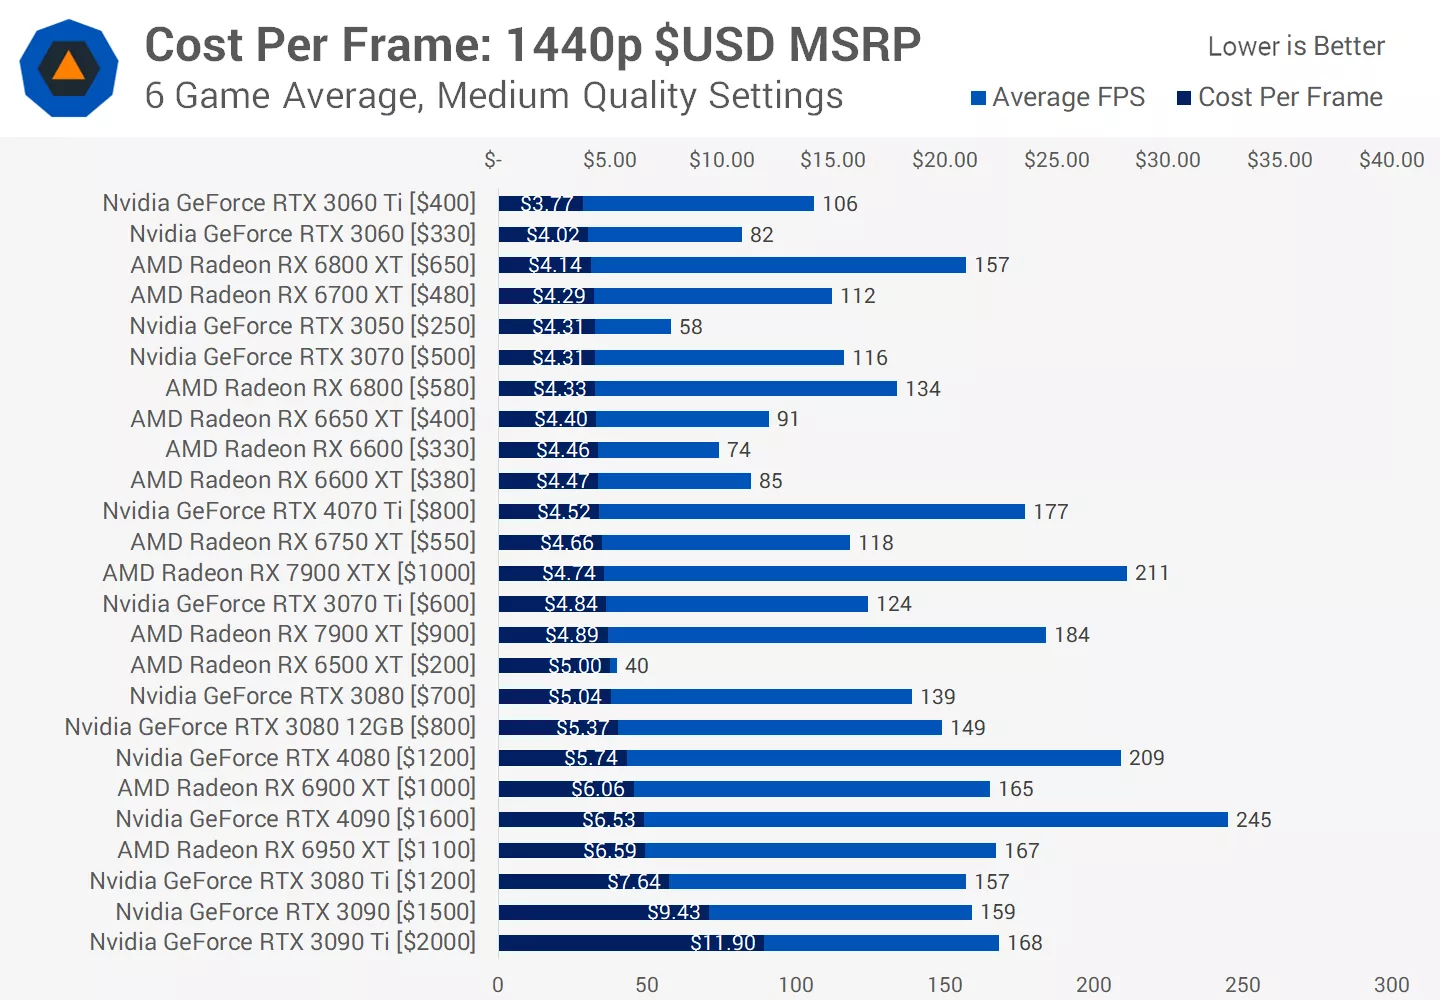 PassMark Software - Video Card (GPU) Benchmarks - High End Video Cards